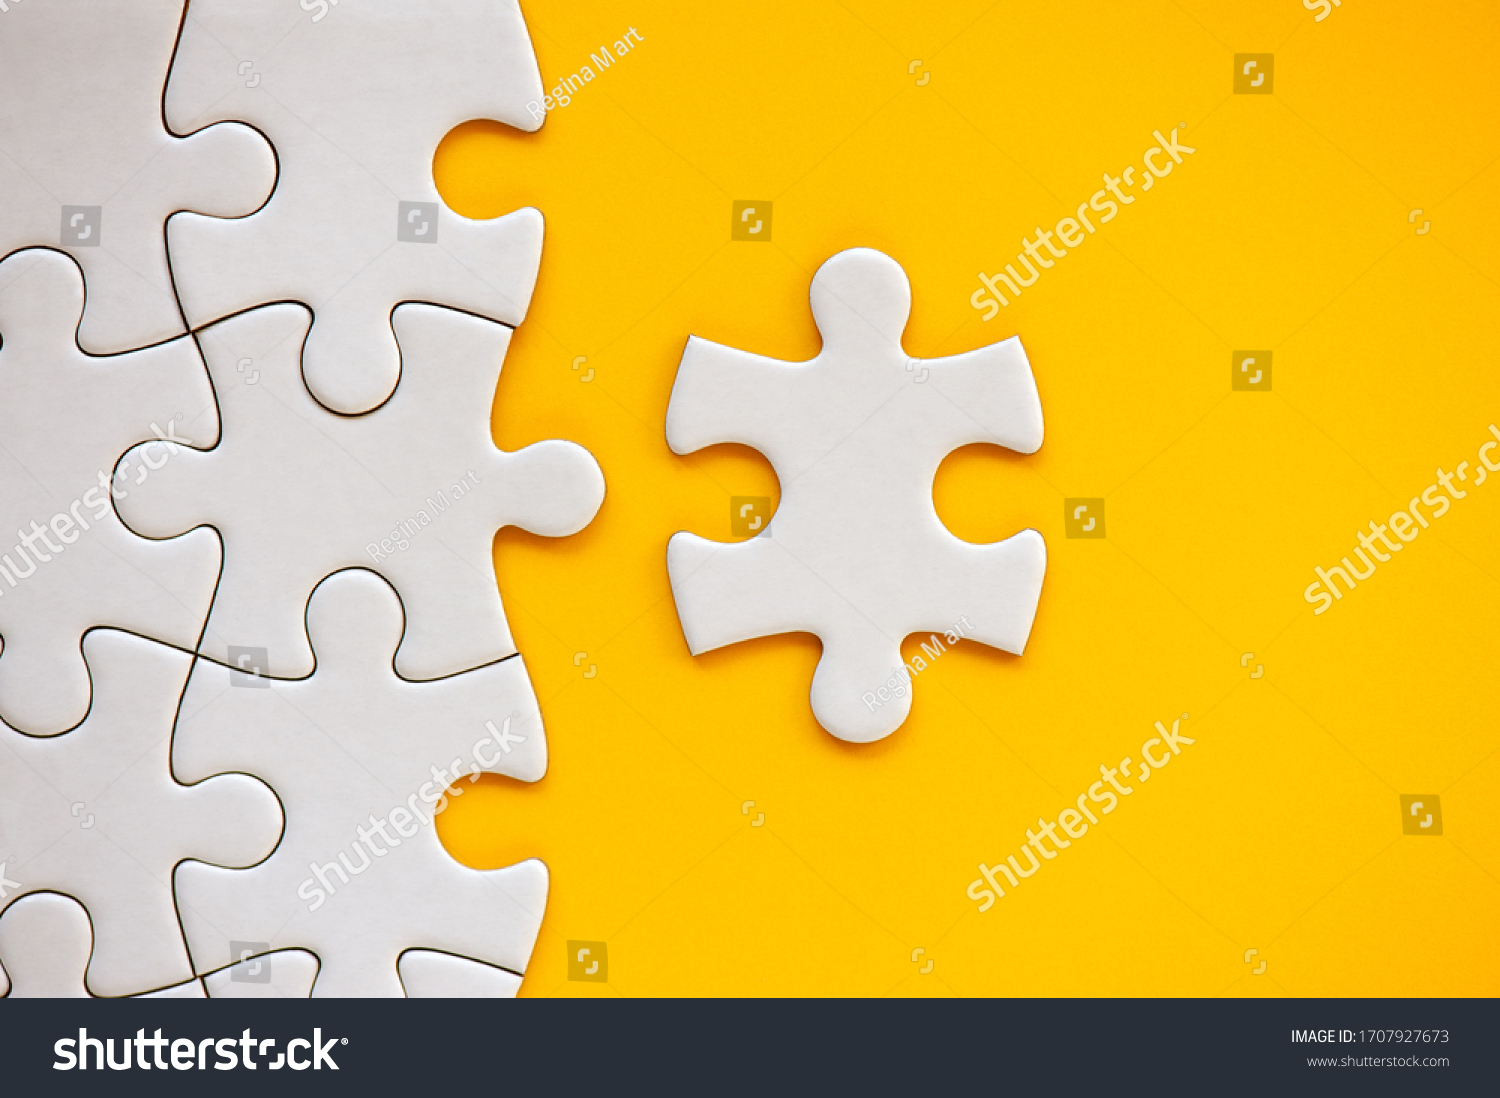 Puzzle pieces on orange background. White square puzzle pieces grid. Business background. Copy space for text, top view, close up. #1707927673